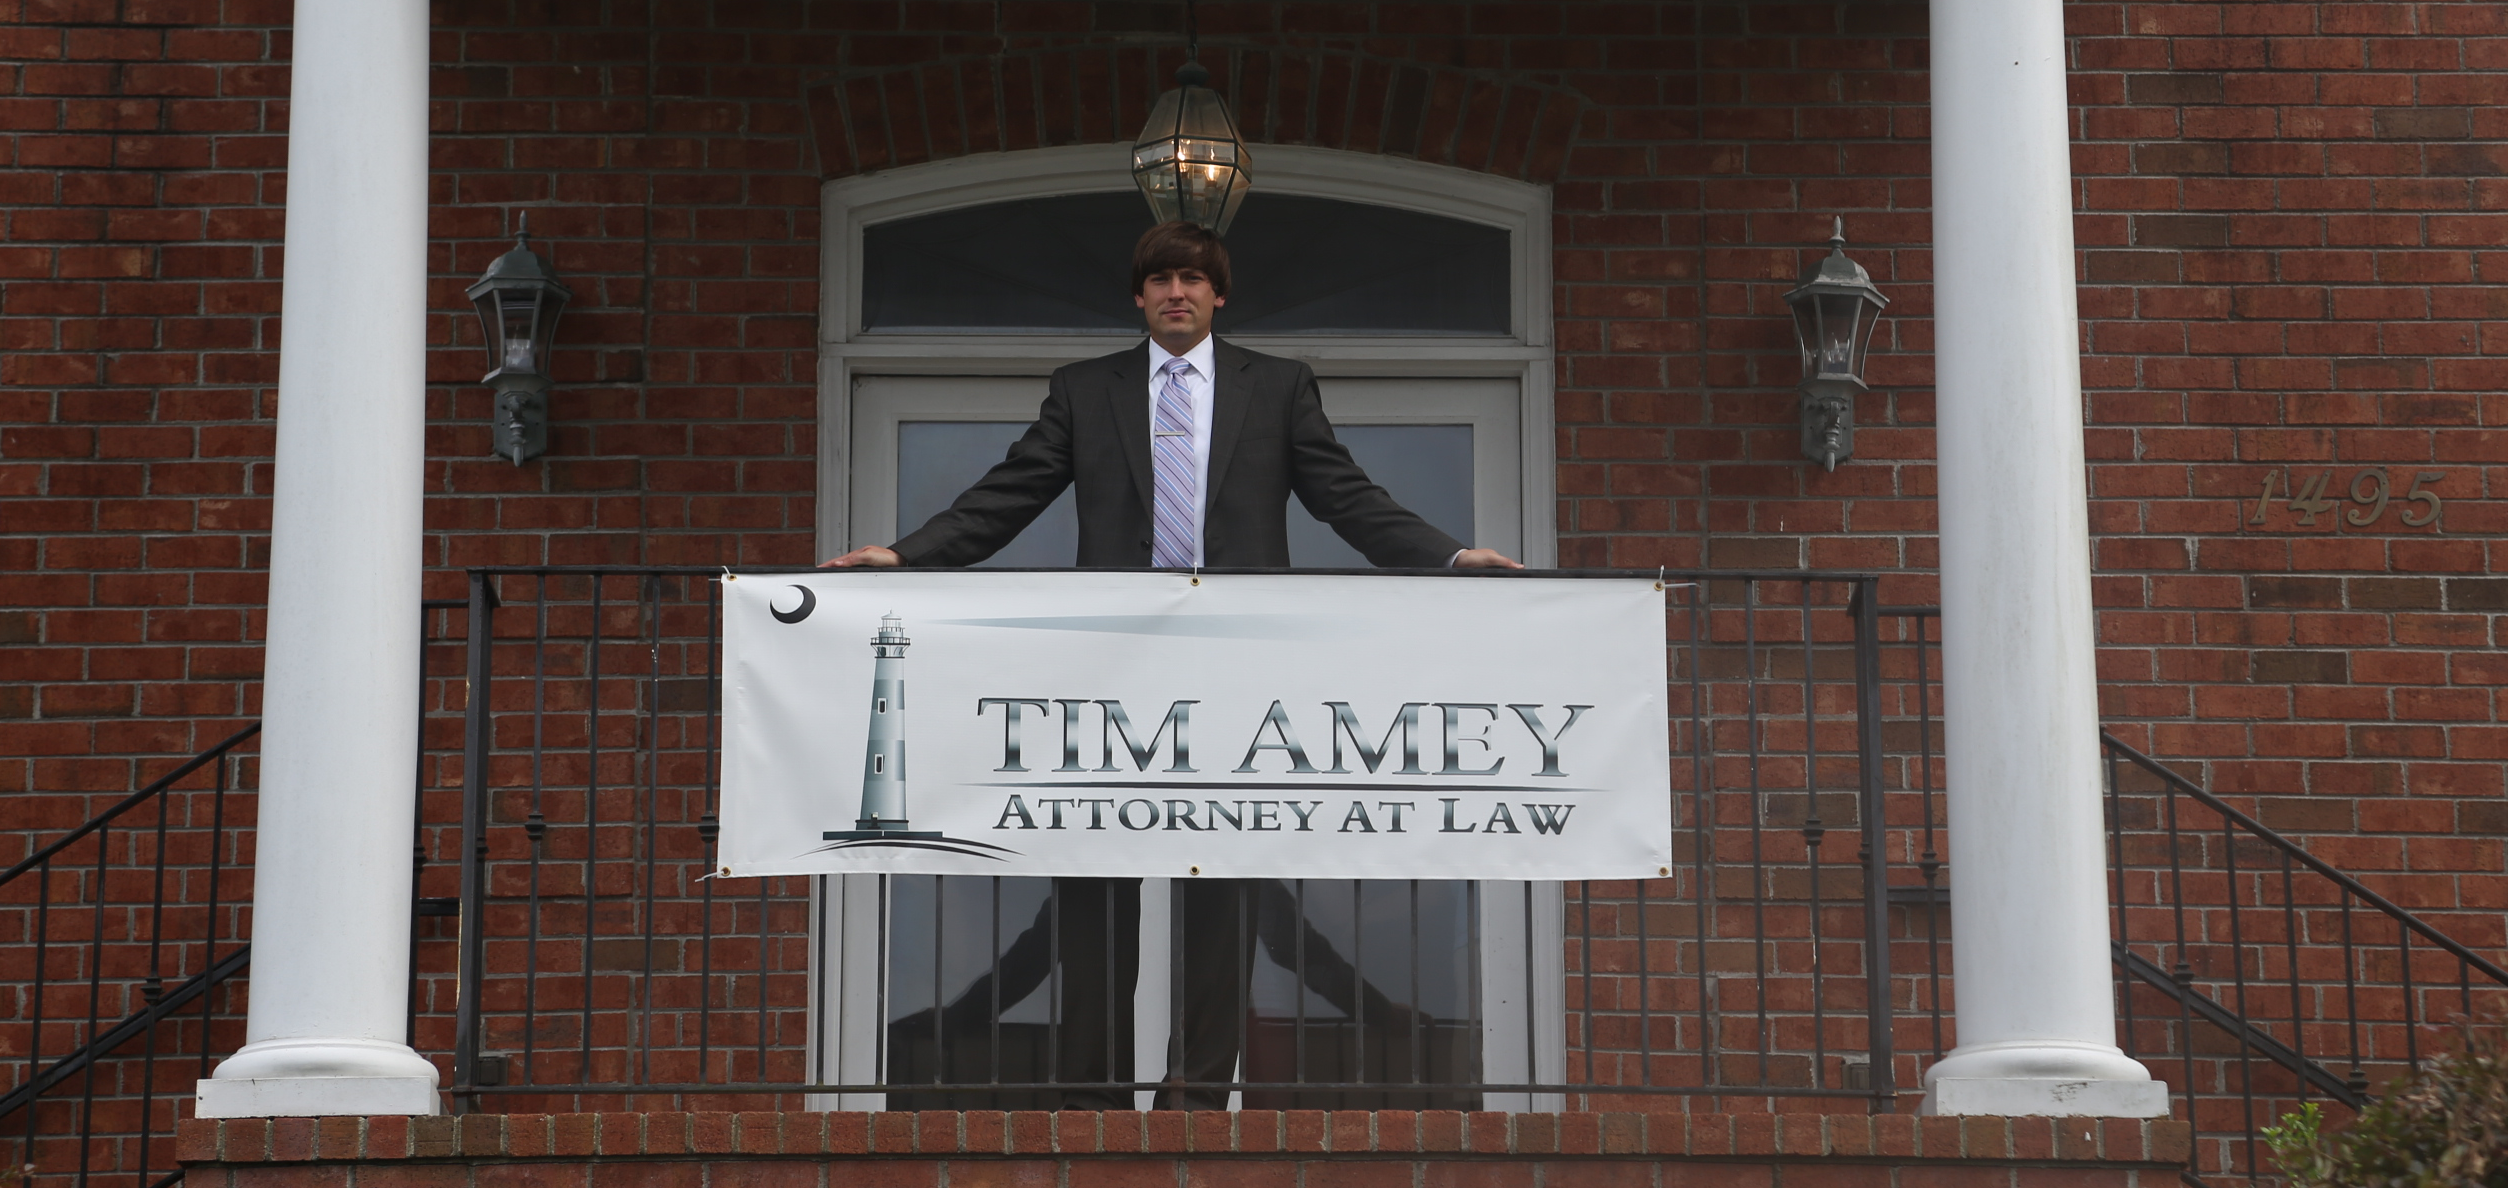 Top of the stairs when coming to visit Tim Amey - Attorney at Law